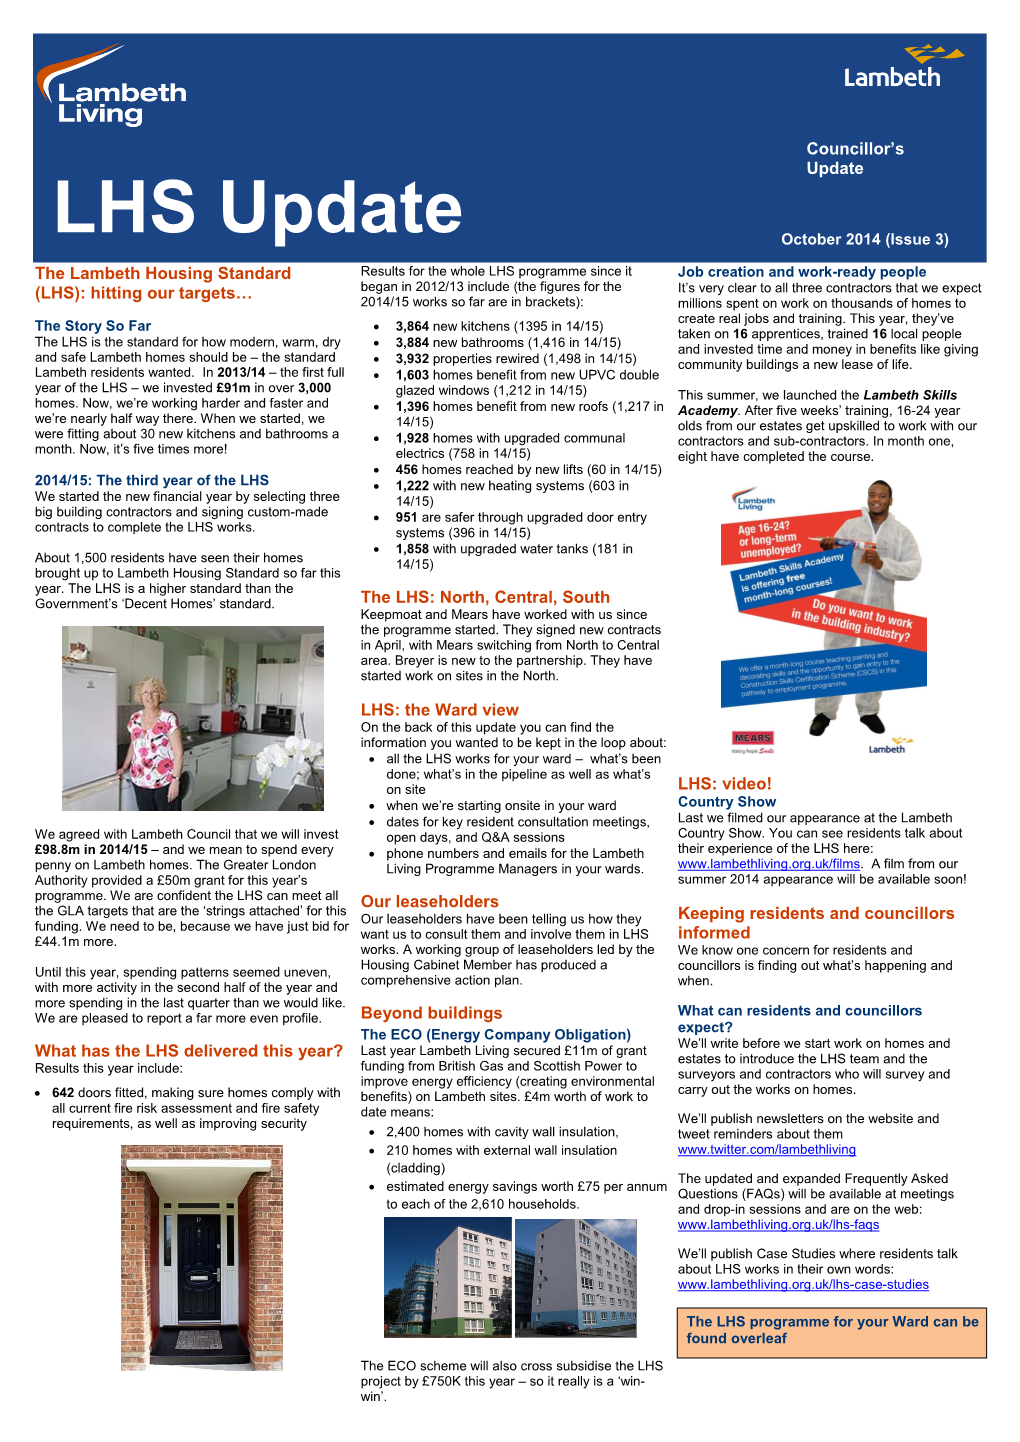 LHS Update October 2014 (Issue 3)